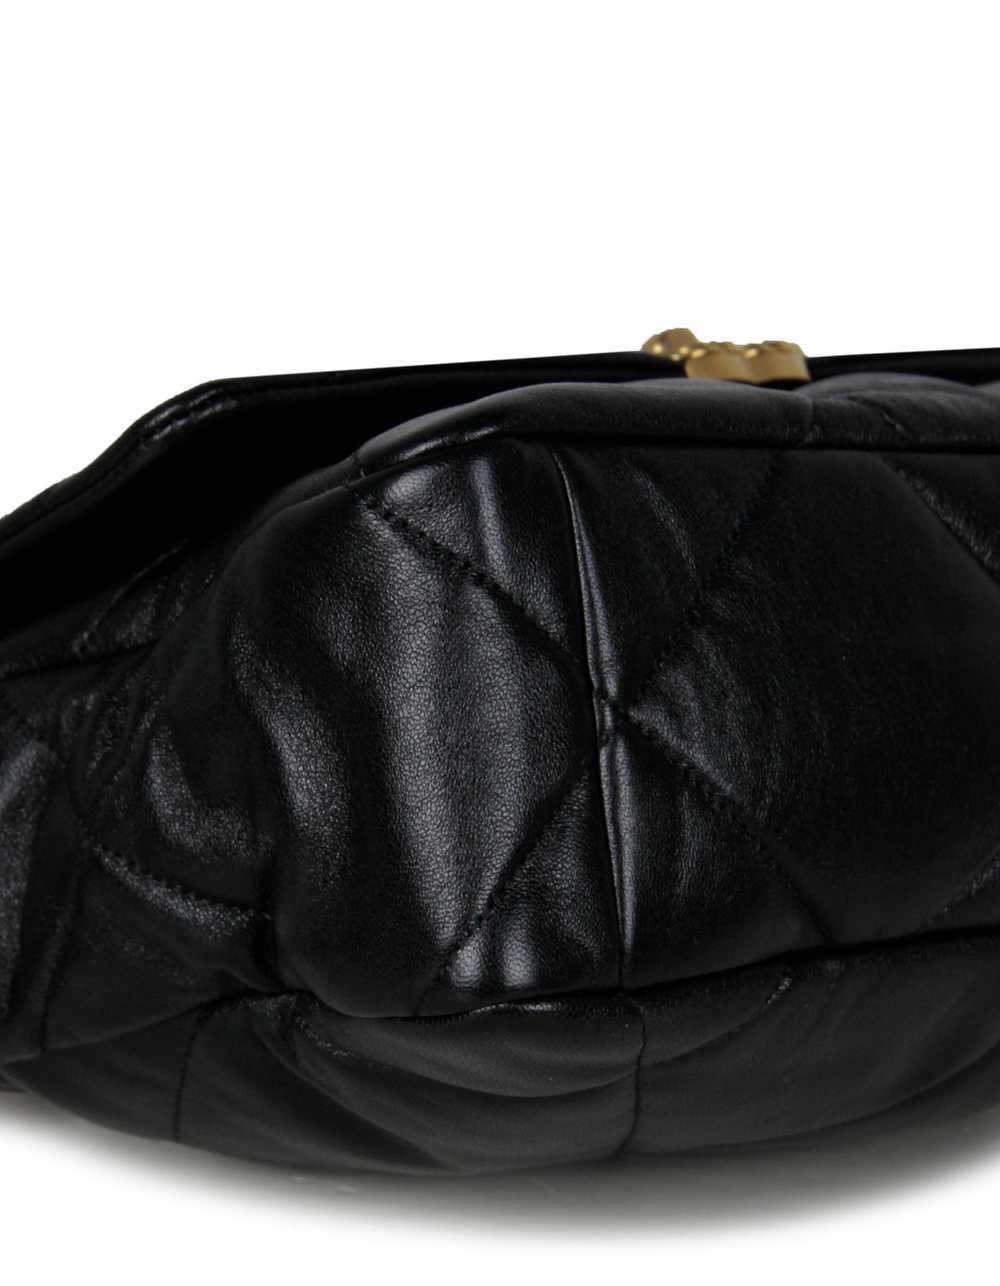 Chanel Black Lambskin Leather Quilted Large 19 Bag - image 4